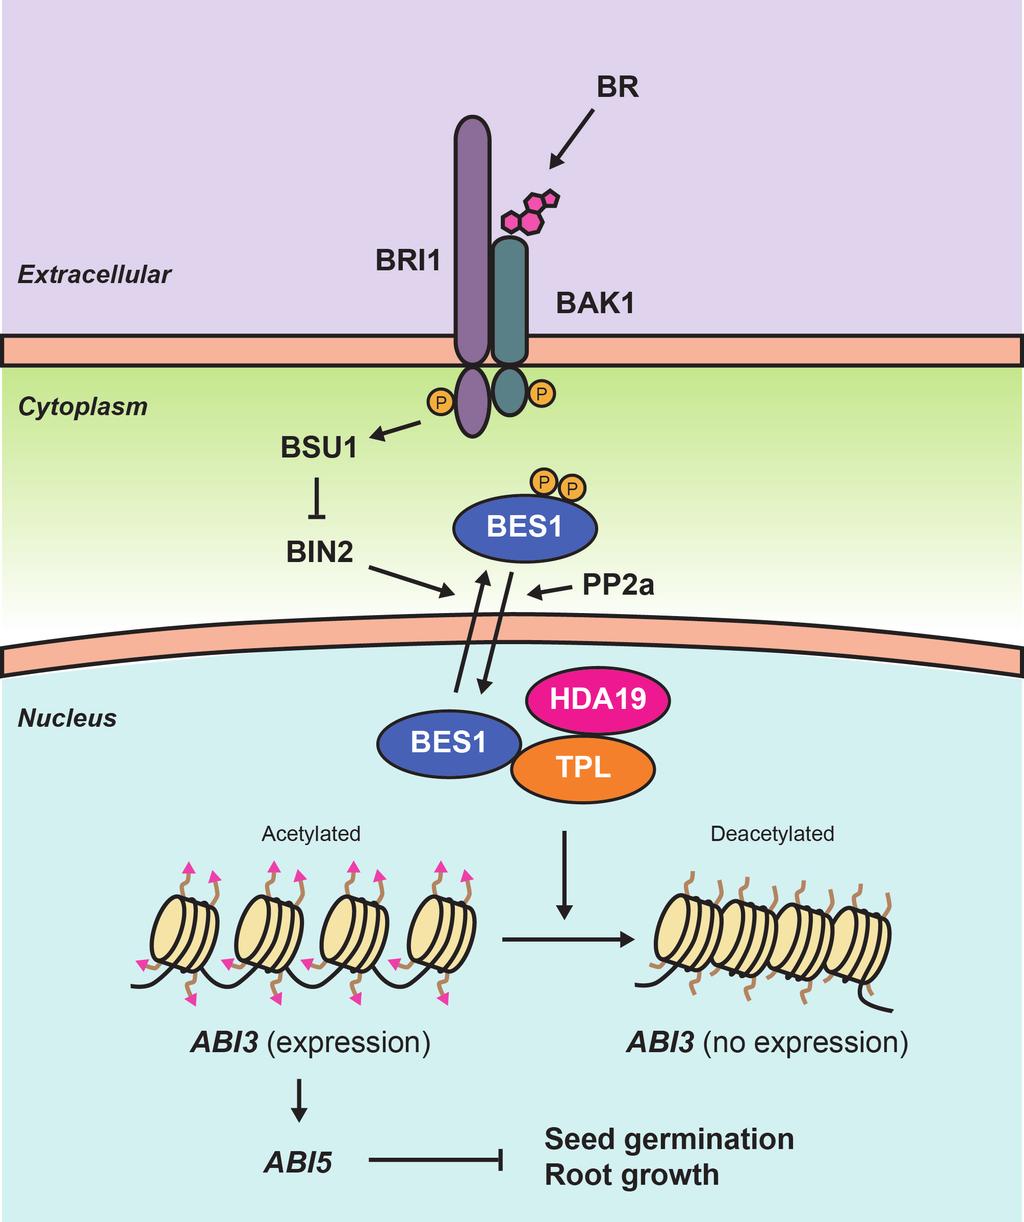 Supplementary Figure 14. Hypothetical model for BRs and ABA crosstalk.